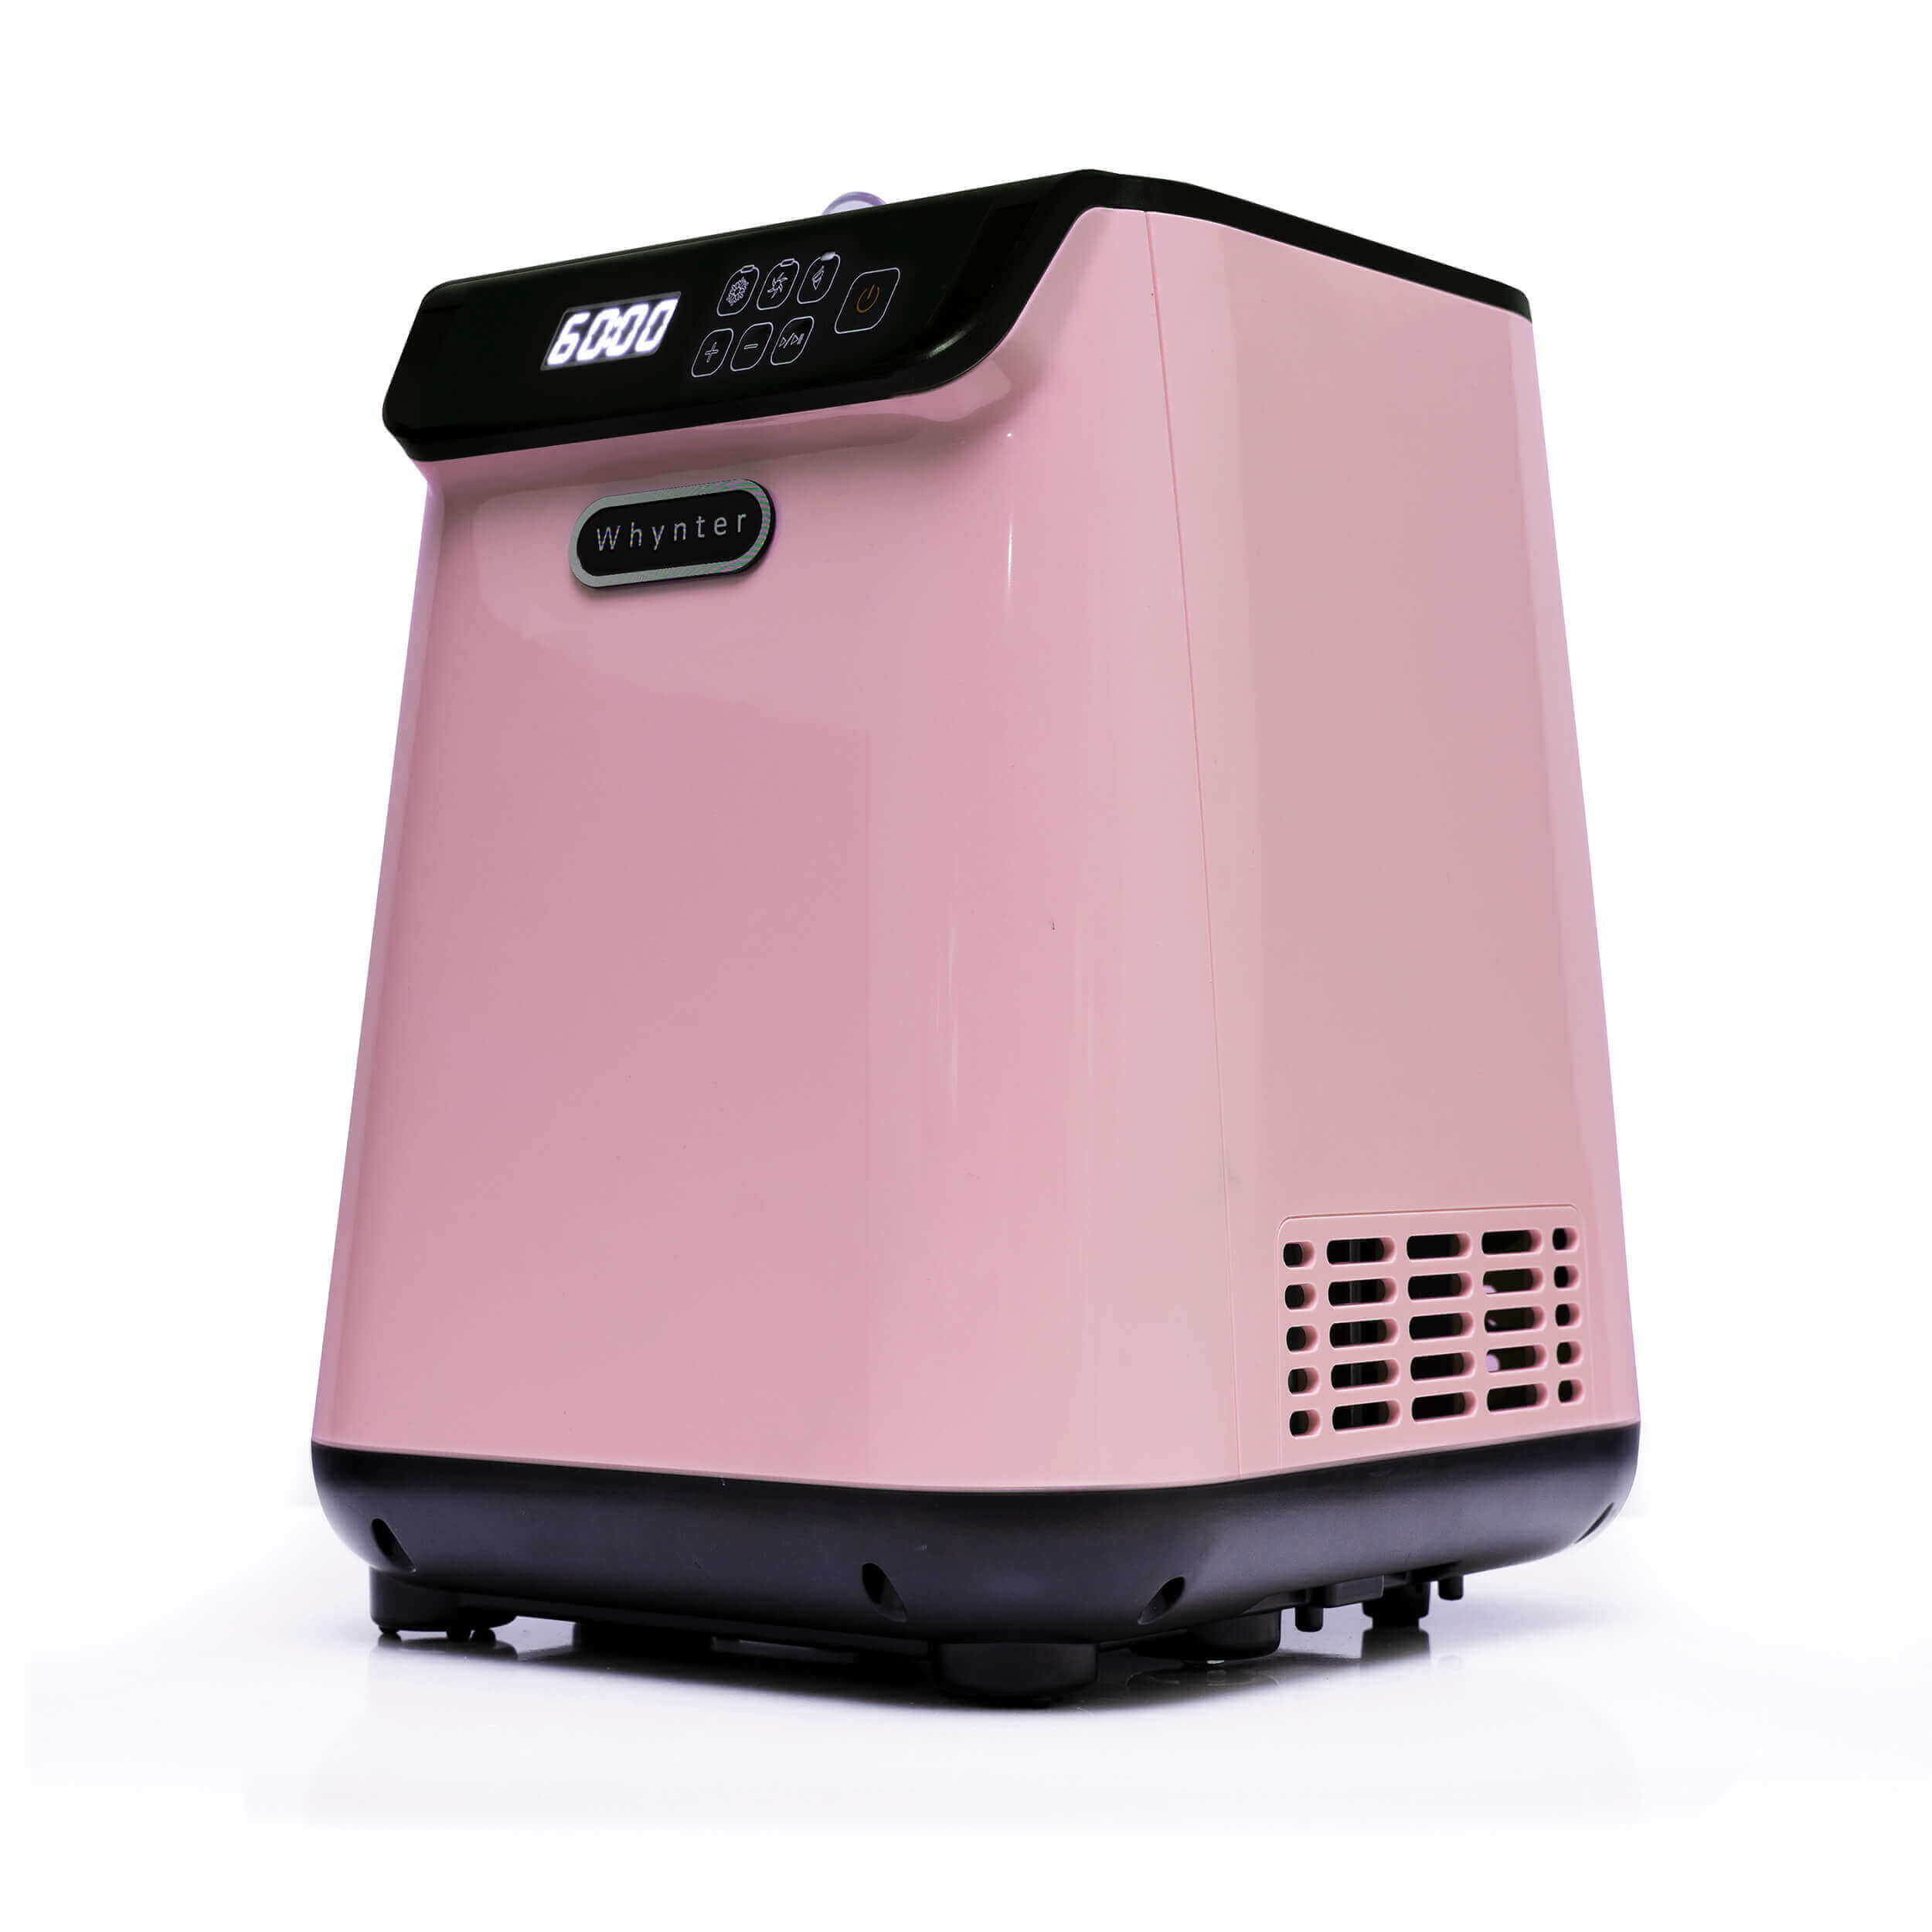 Whynter Limited Edition Pink Compressor Ice Cream Maker